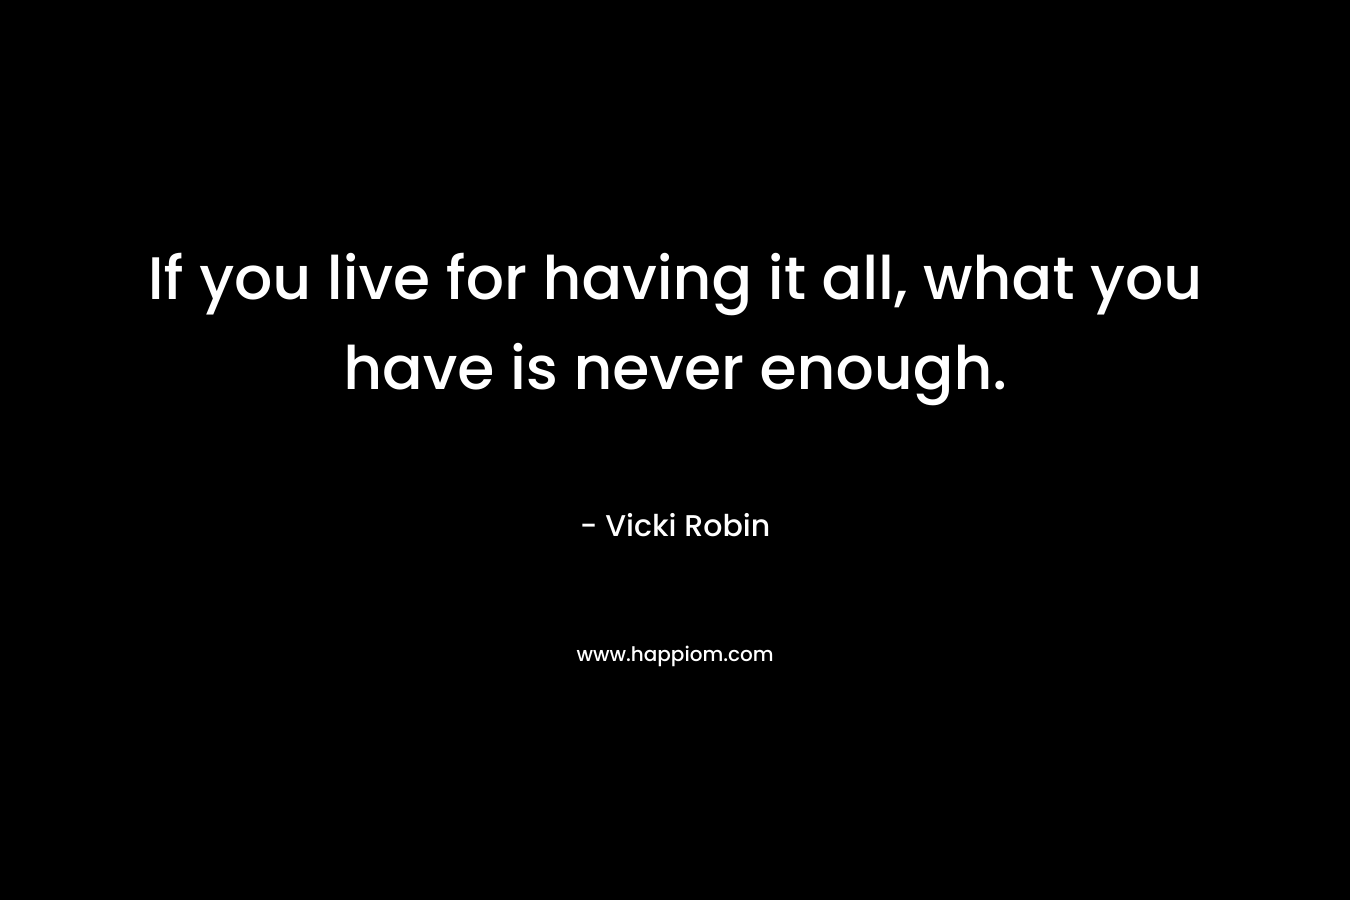 If you live for having it all, what you have is never enough.